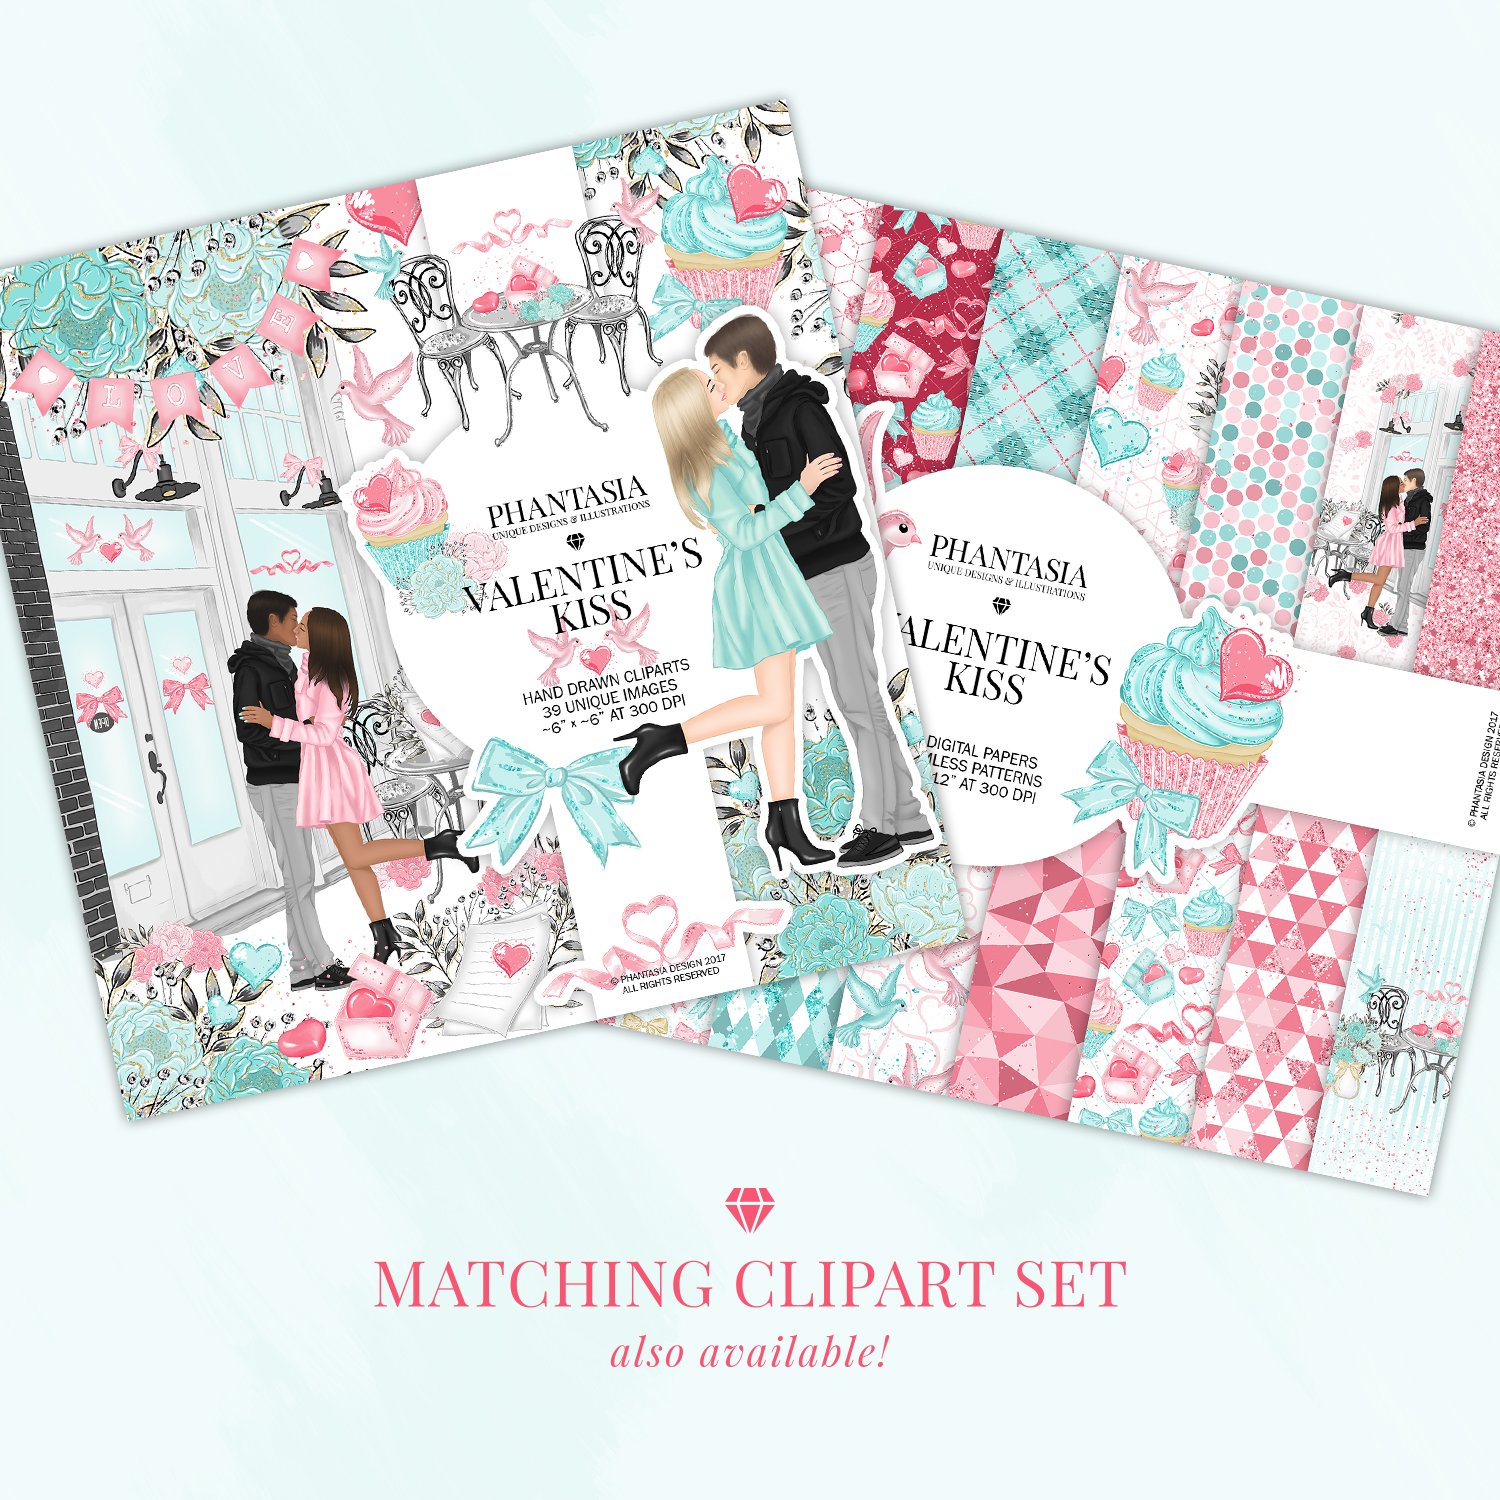 Matching clipart set is also available.